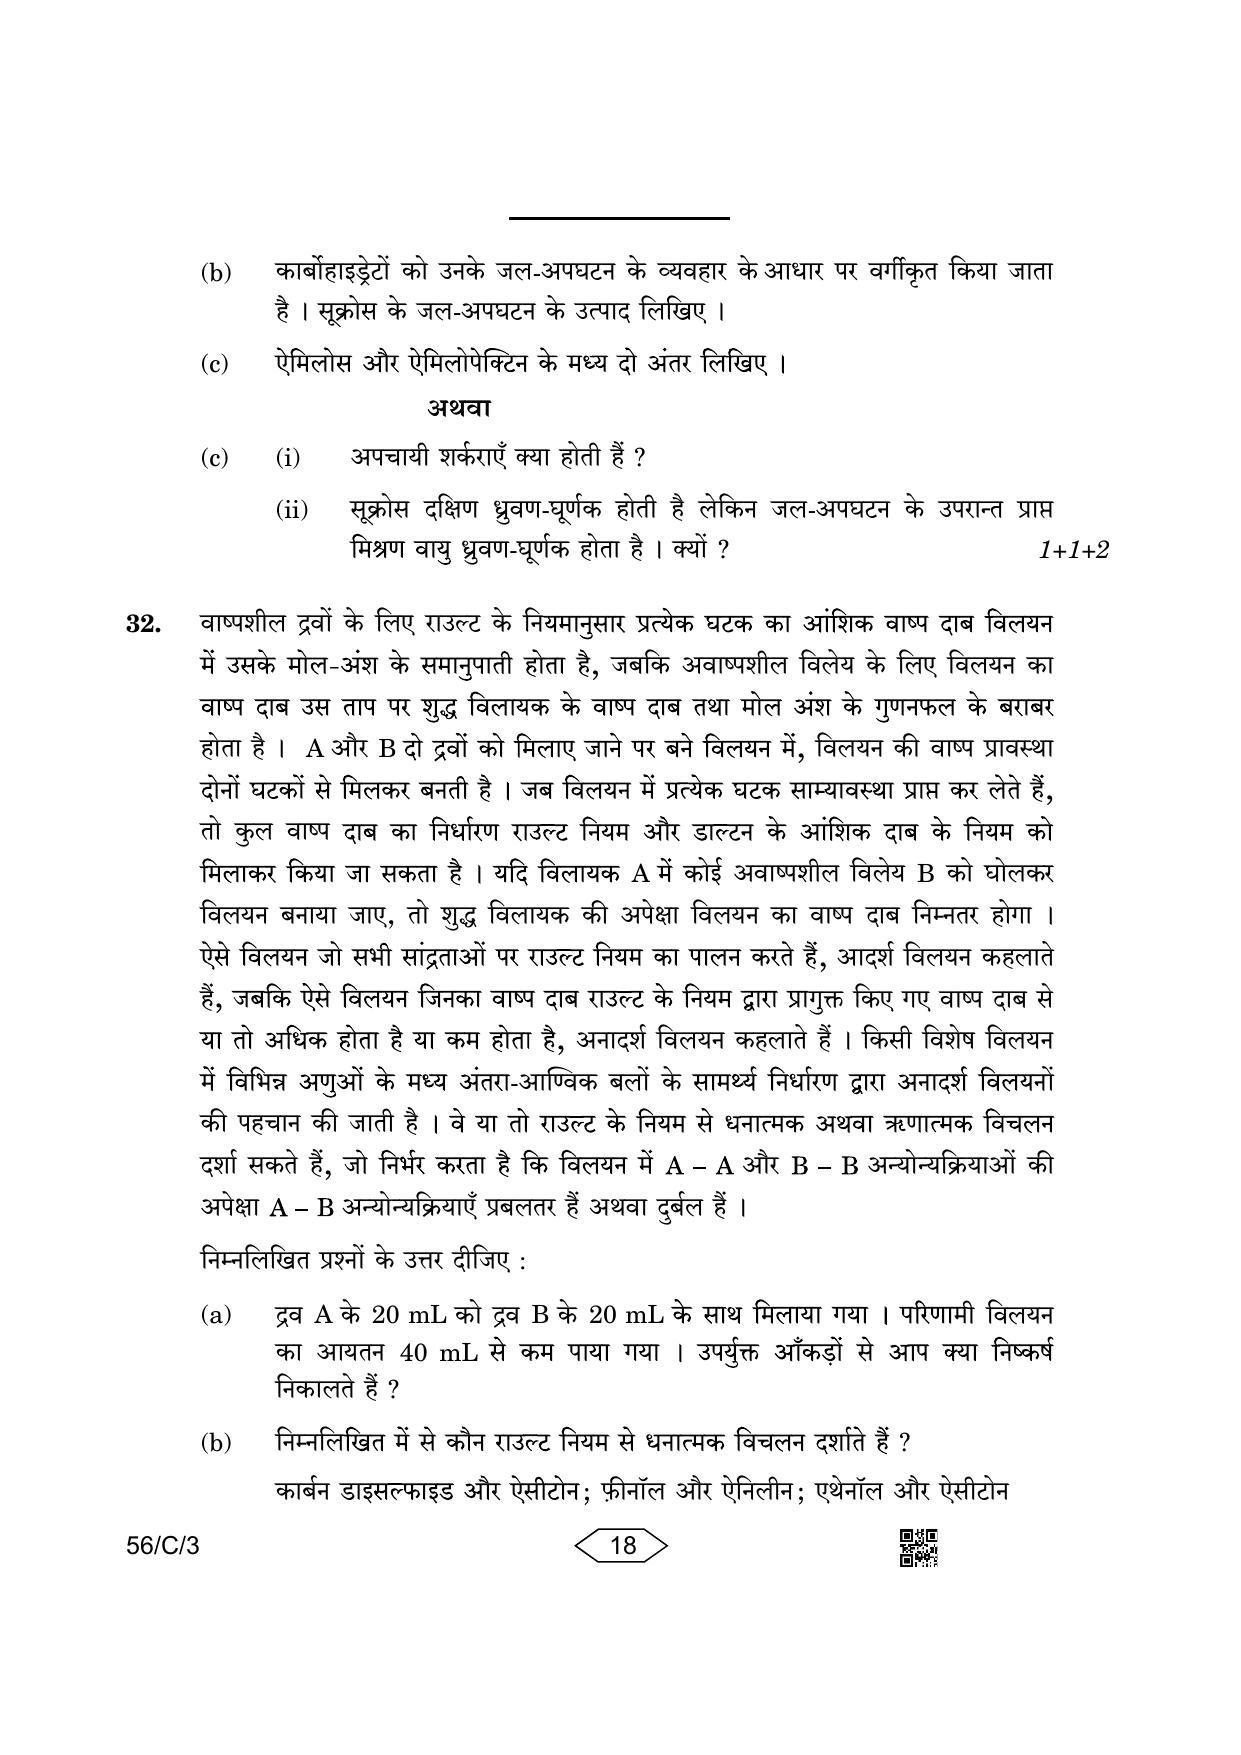 CBSE Class 12 56-3 Chemistry 2023 (Compartment) Question Paper - Page 18